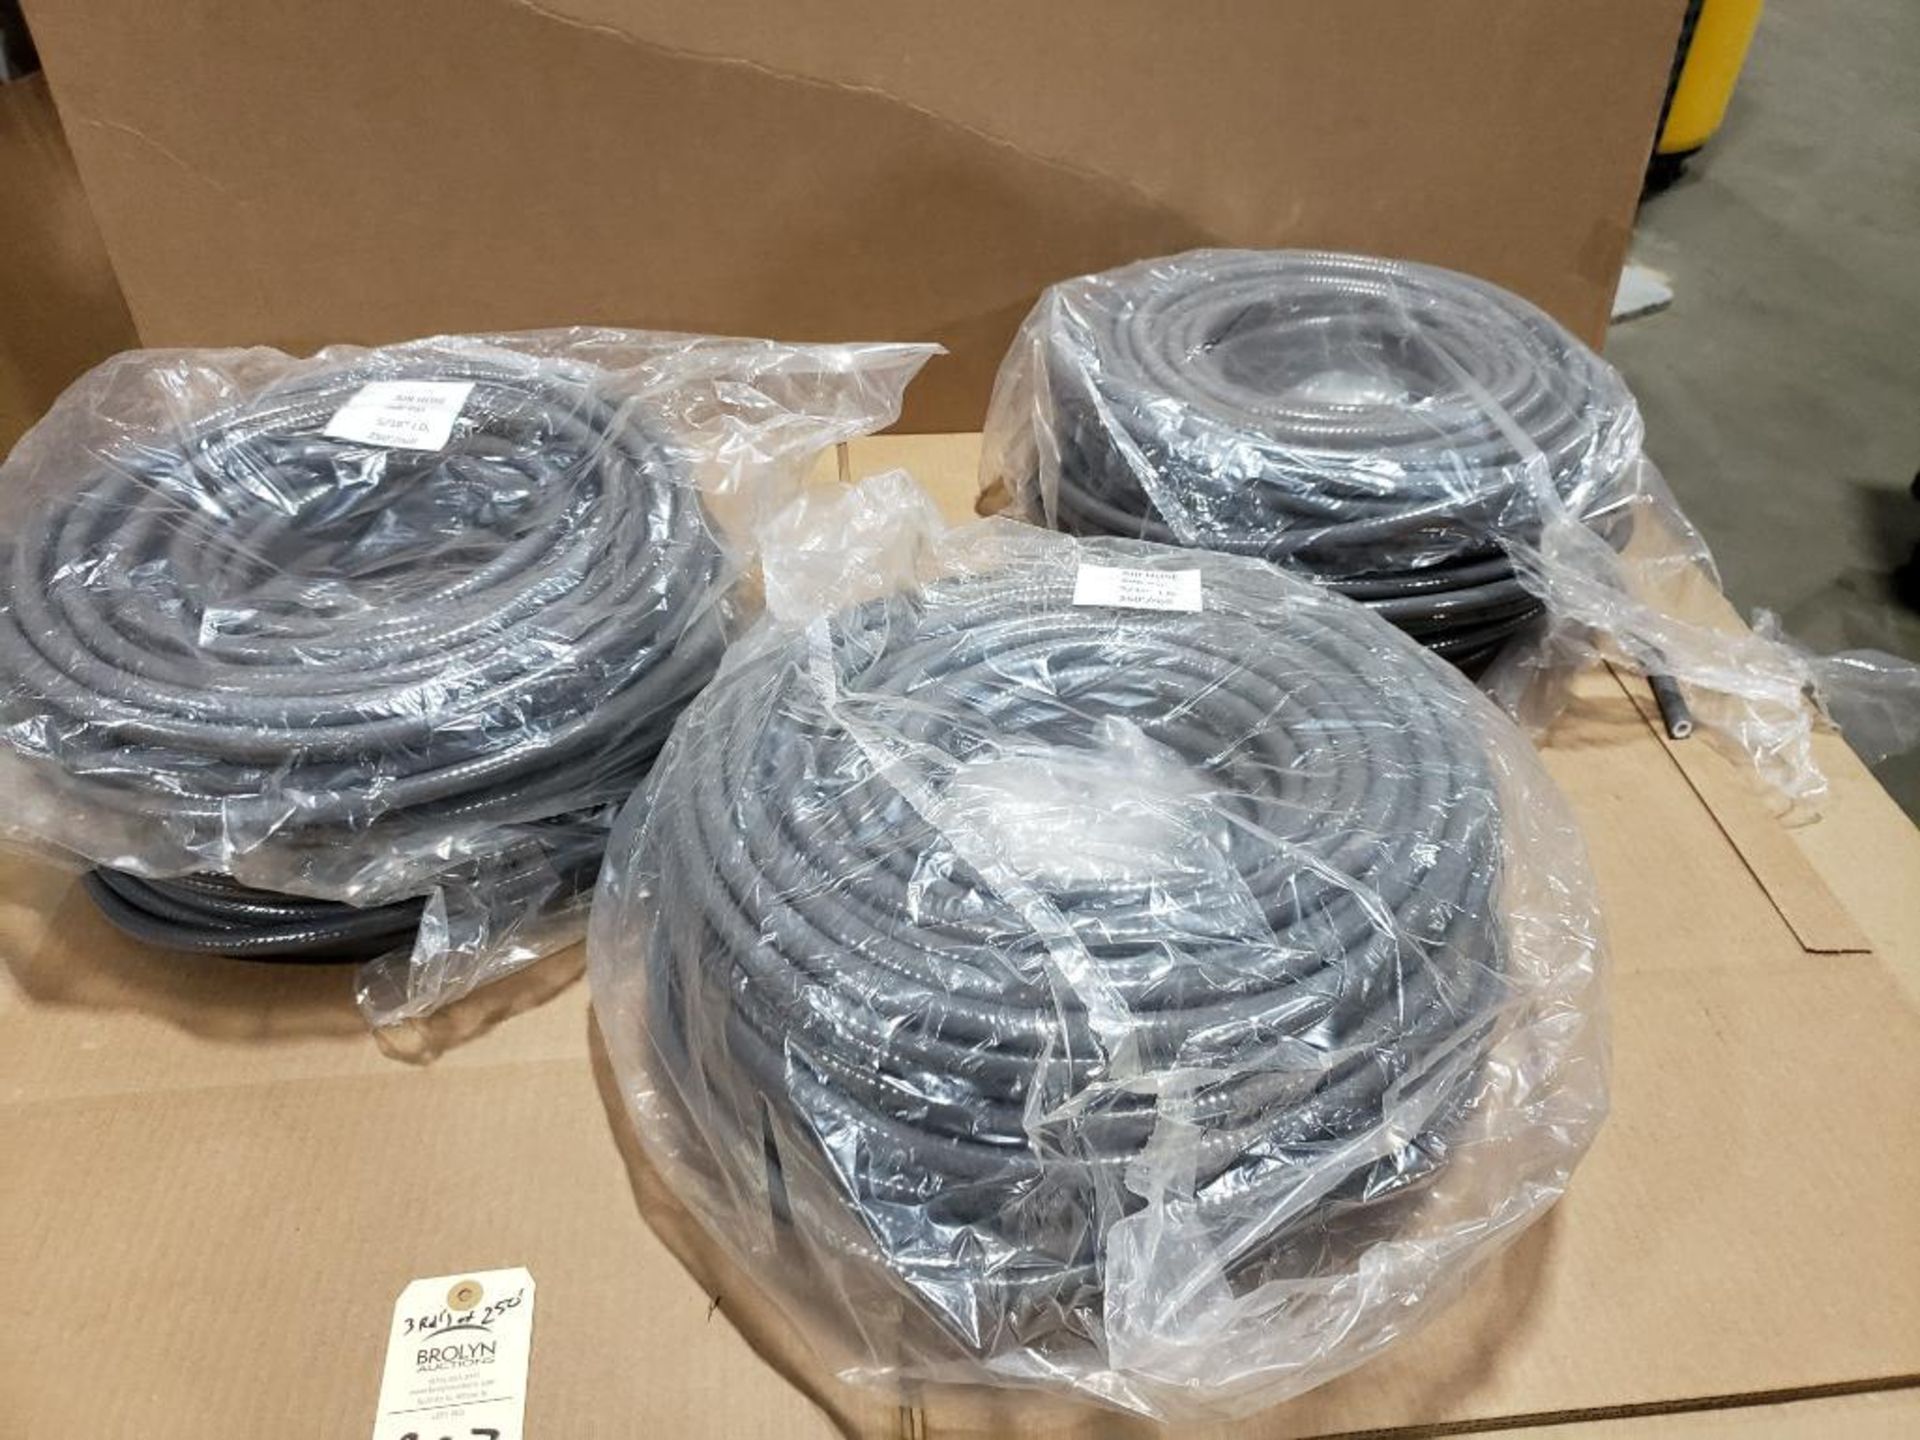 Qty 750ft - Air hose. 300psi, 5/16in I.D. (3 rolls of 250ft)